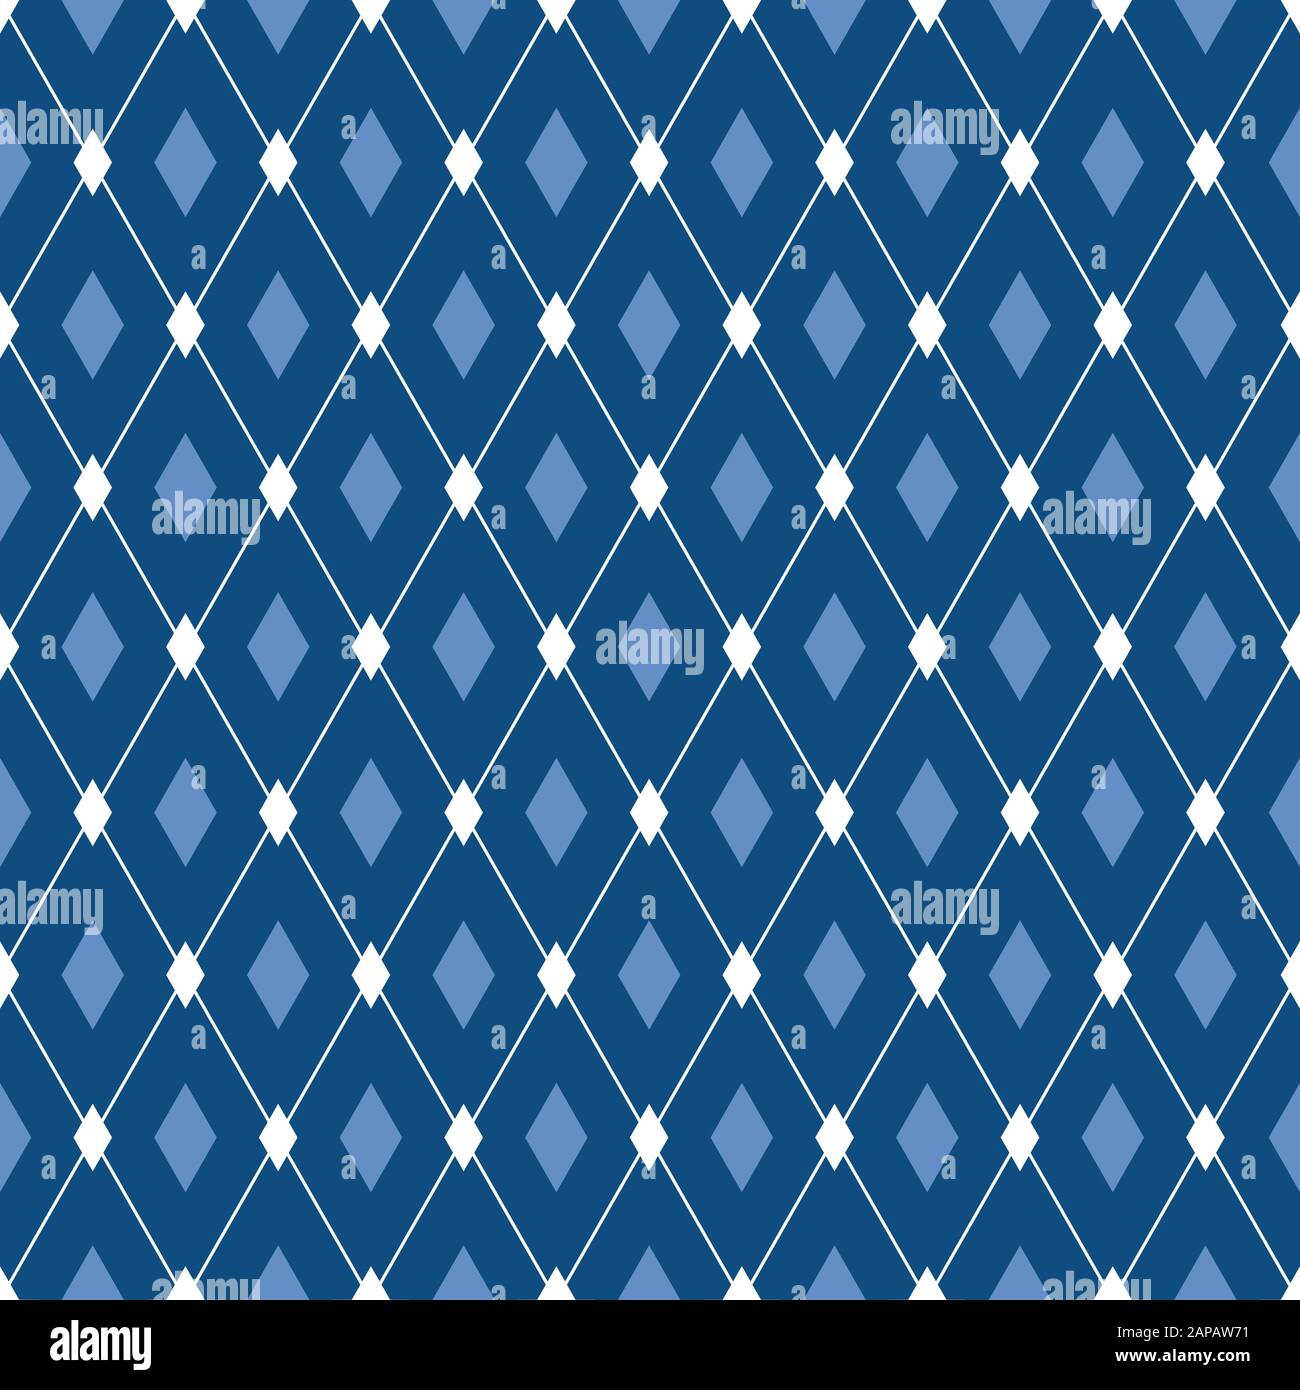 Vector seamless male pattern. Blue diamonds abstract background. For fabric print, wallpaper design Stock Vector